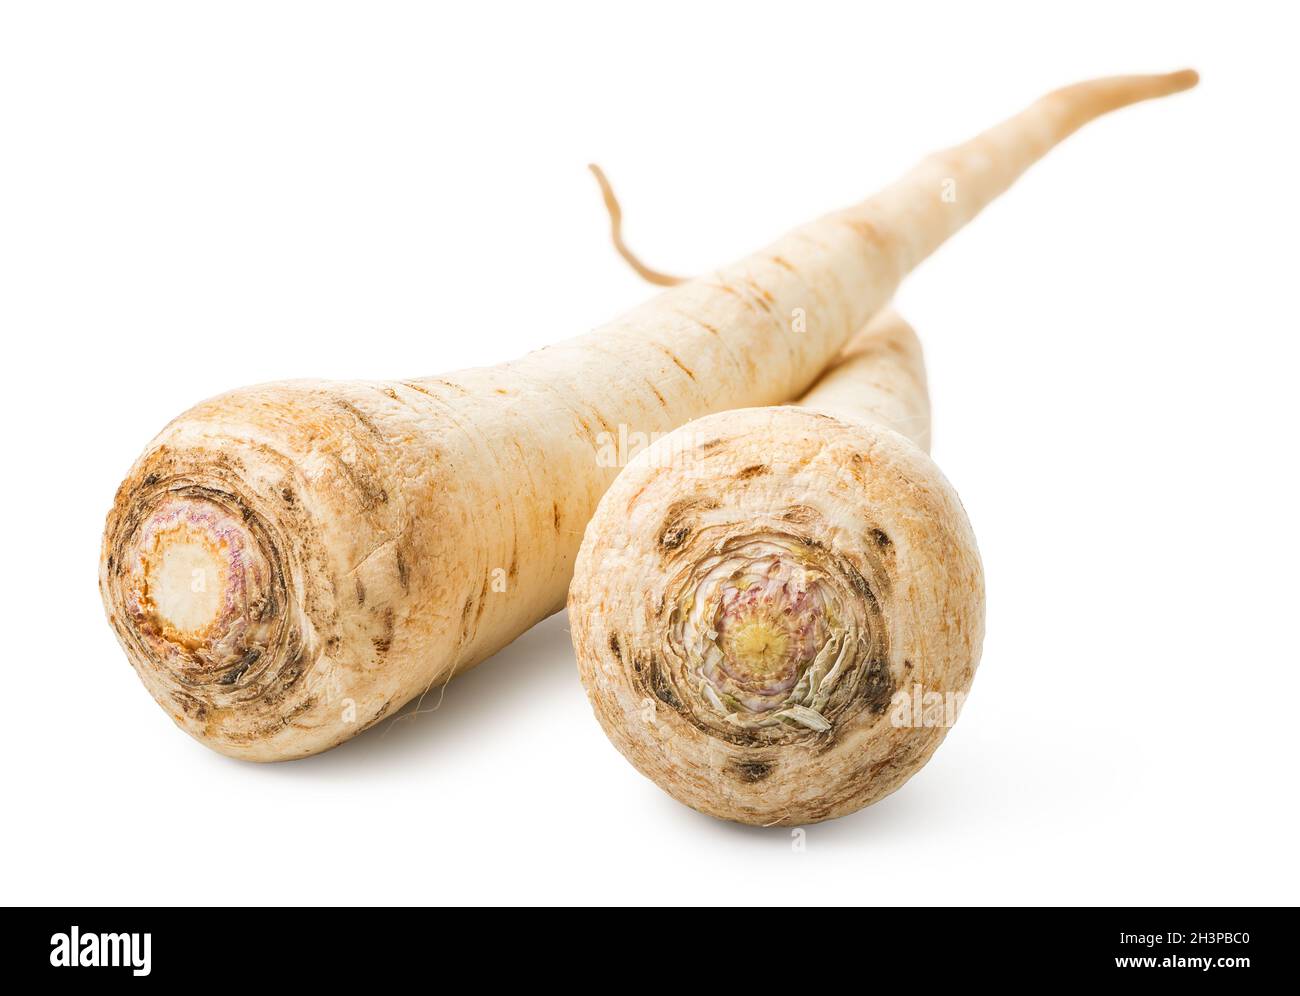 Parsley root close up Stock Photo